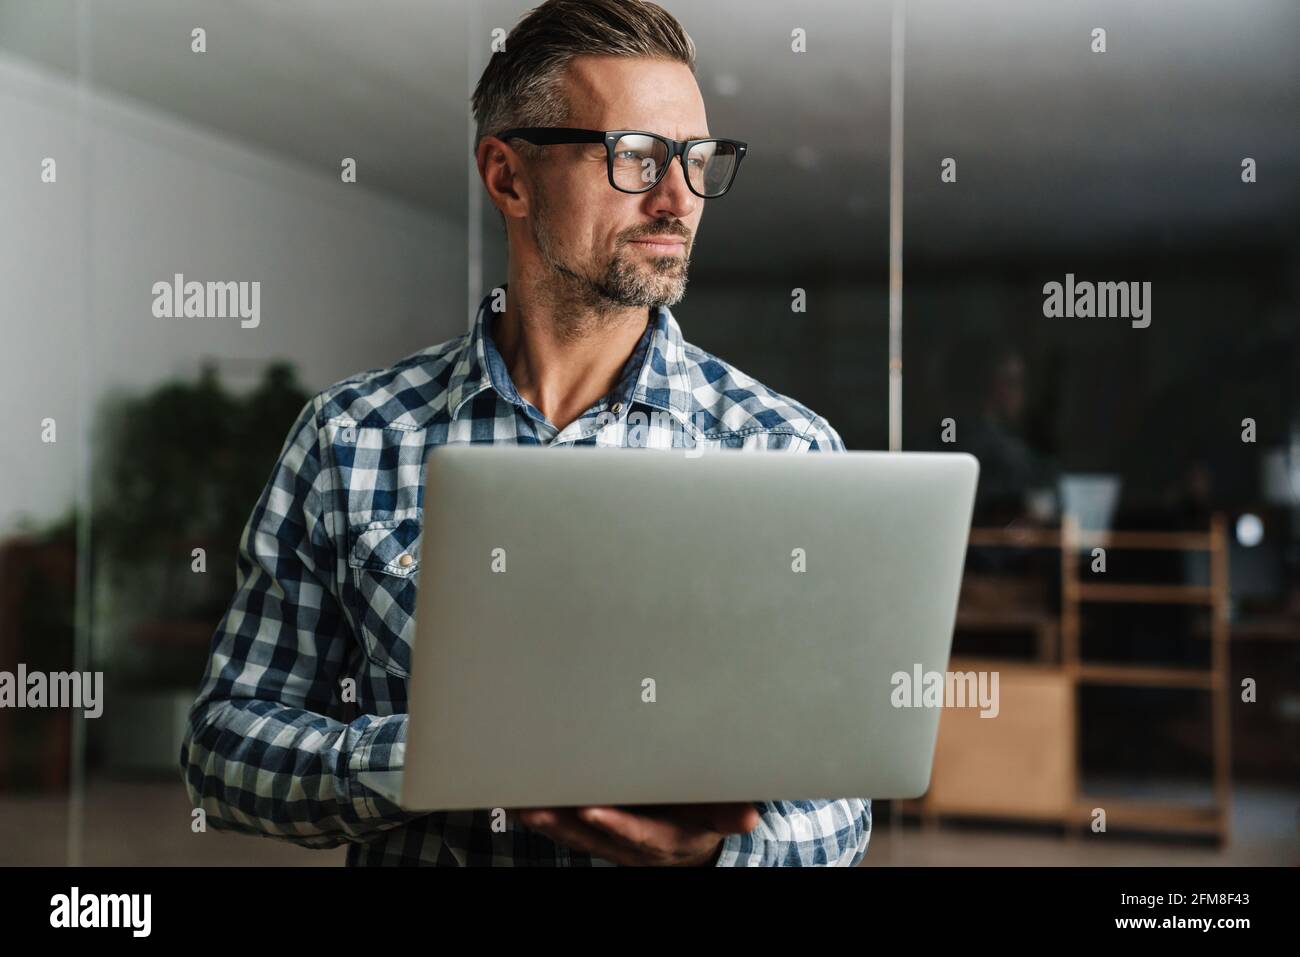 Serious white-haired man working with laptop while standing in office Stock Photo